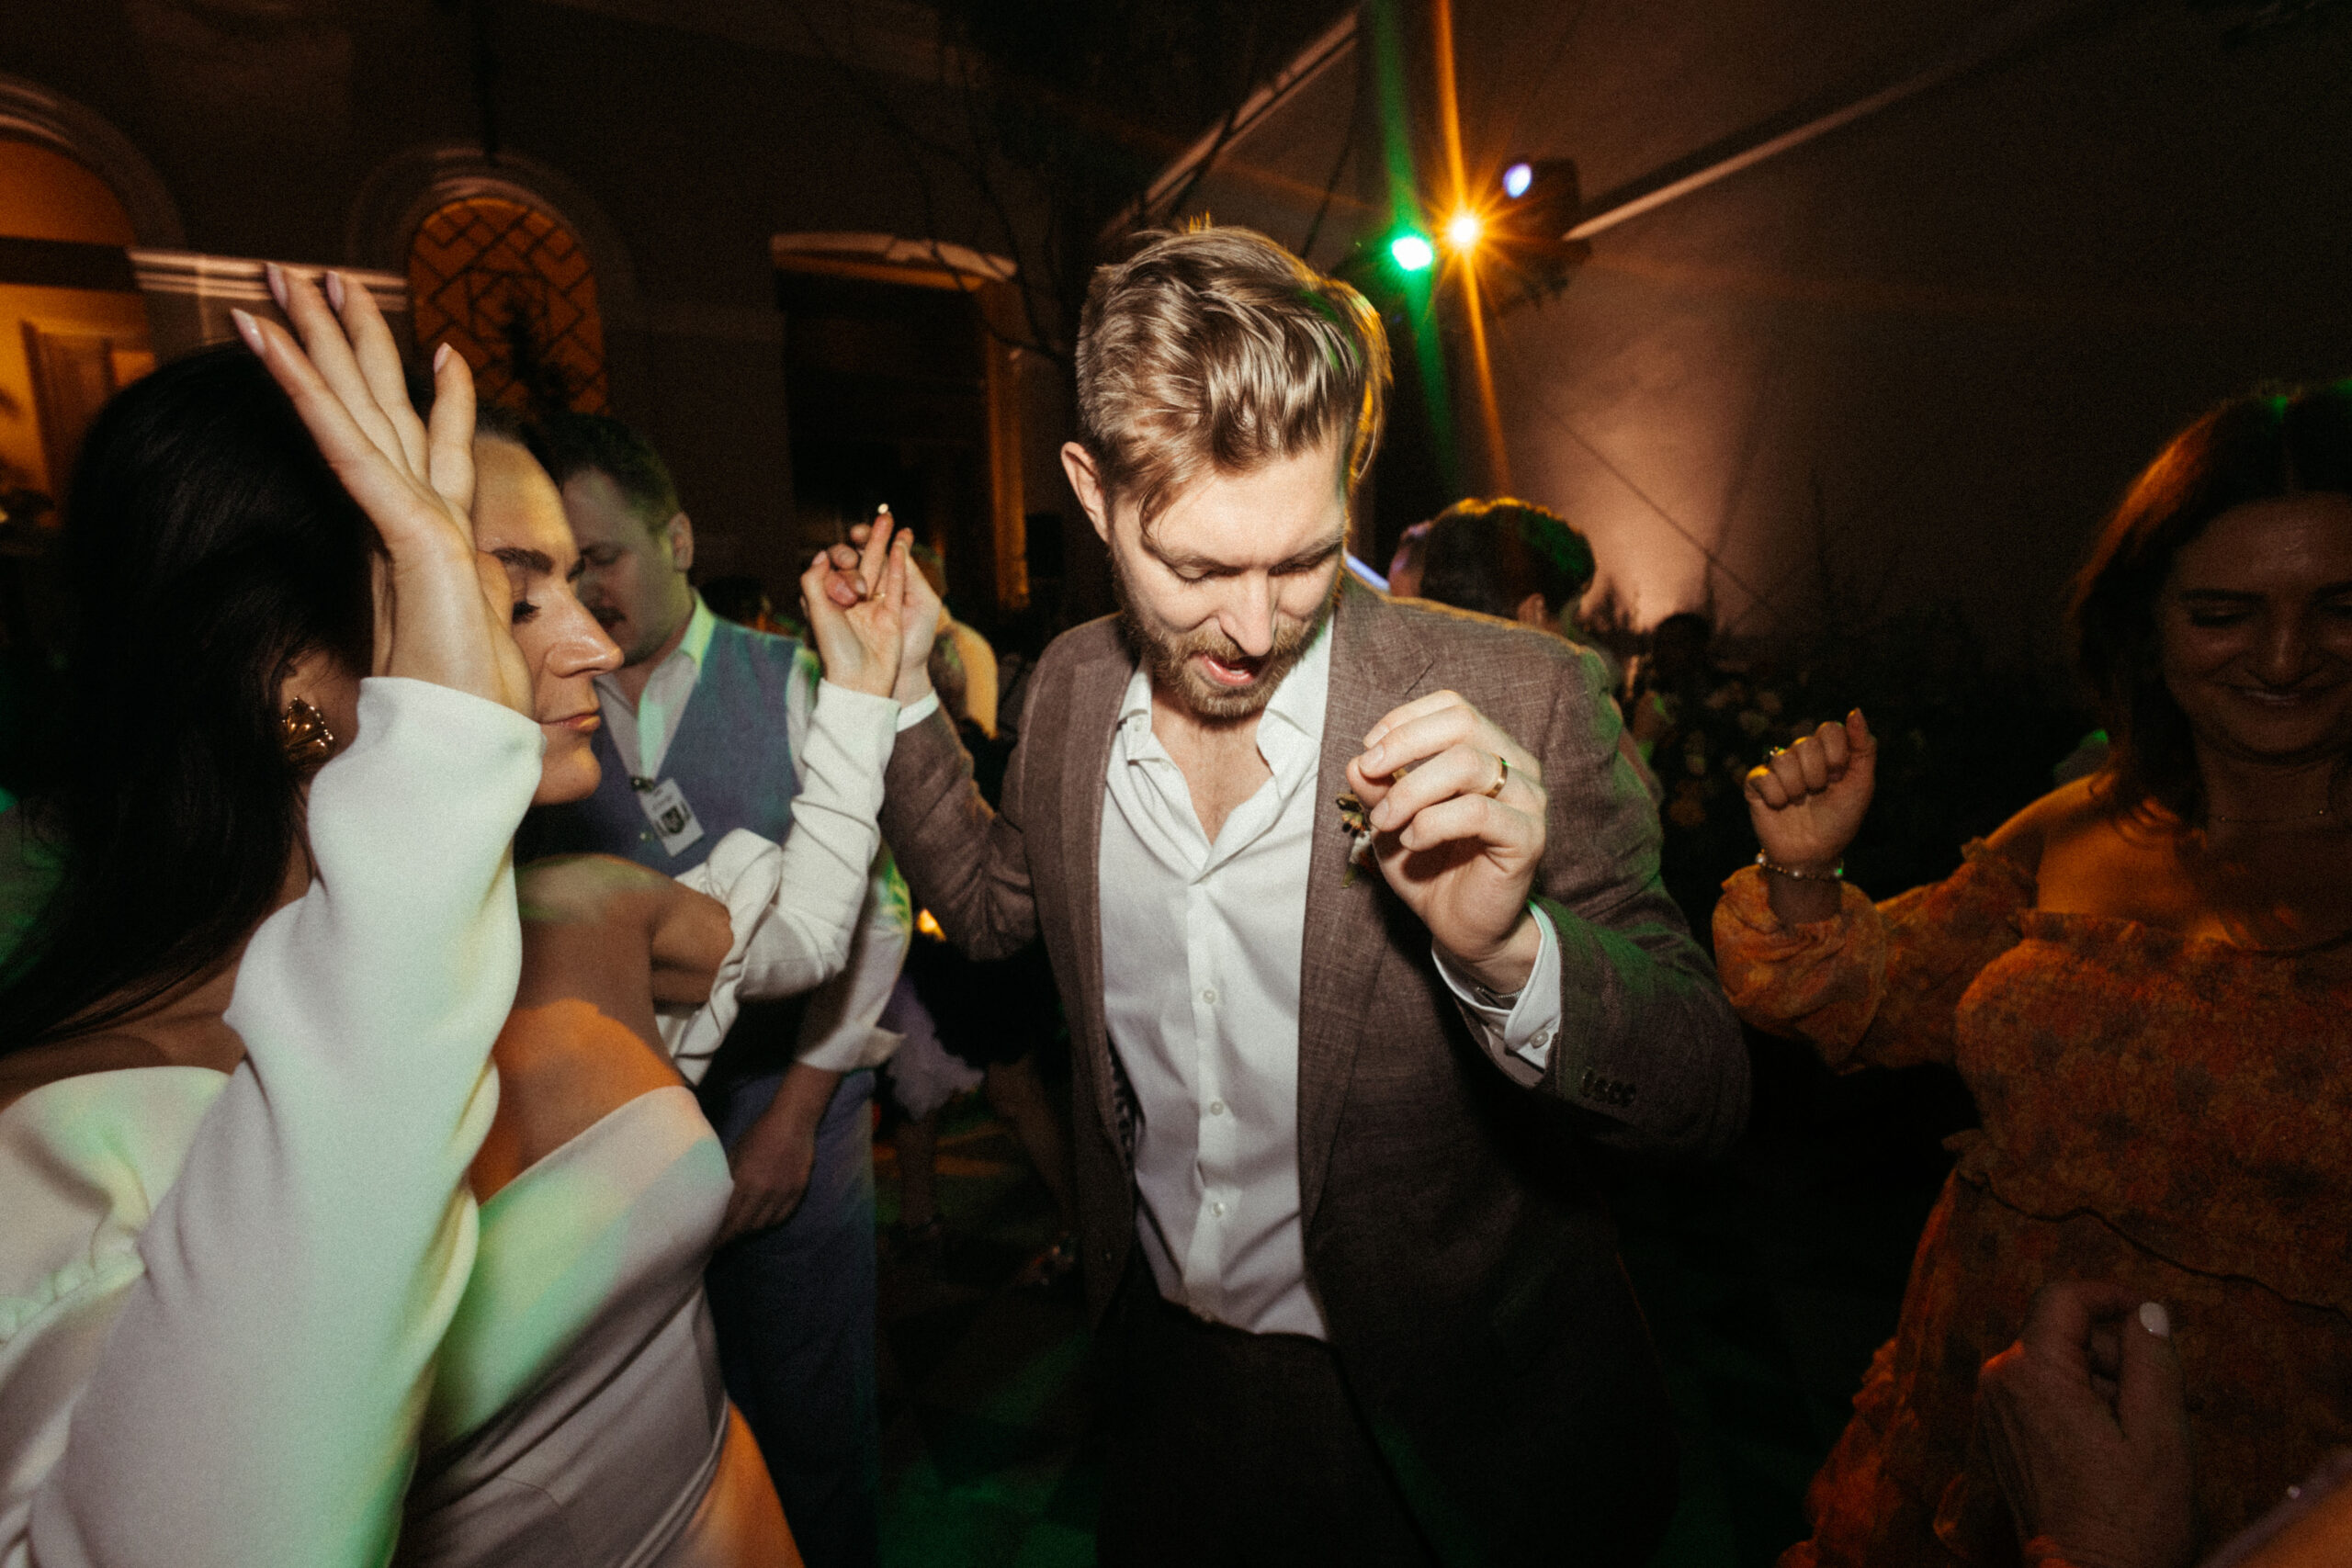 Bride and groom share a dance with their guests during their dreamy reception at Salon Barcelona in Mexico City, Mexico!